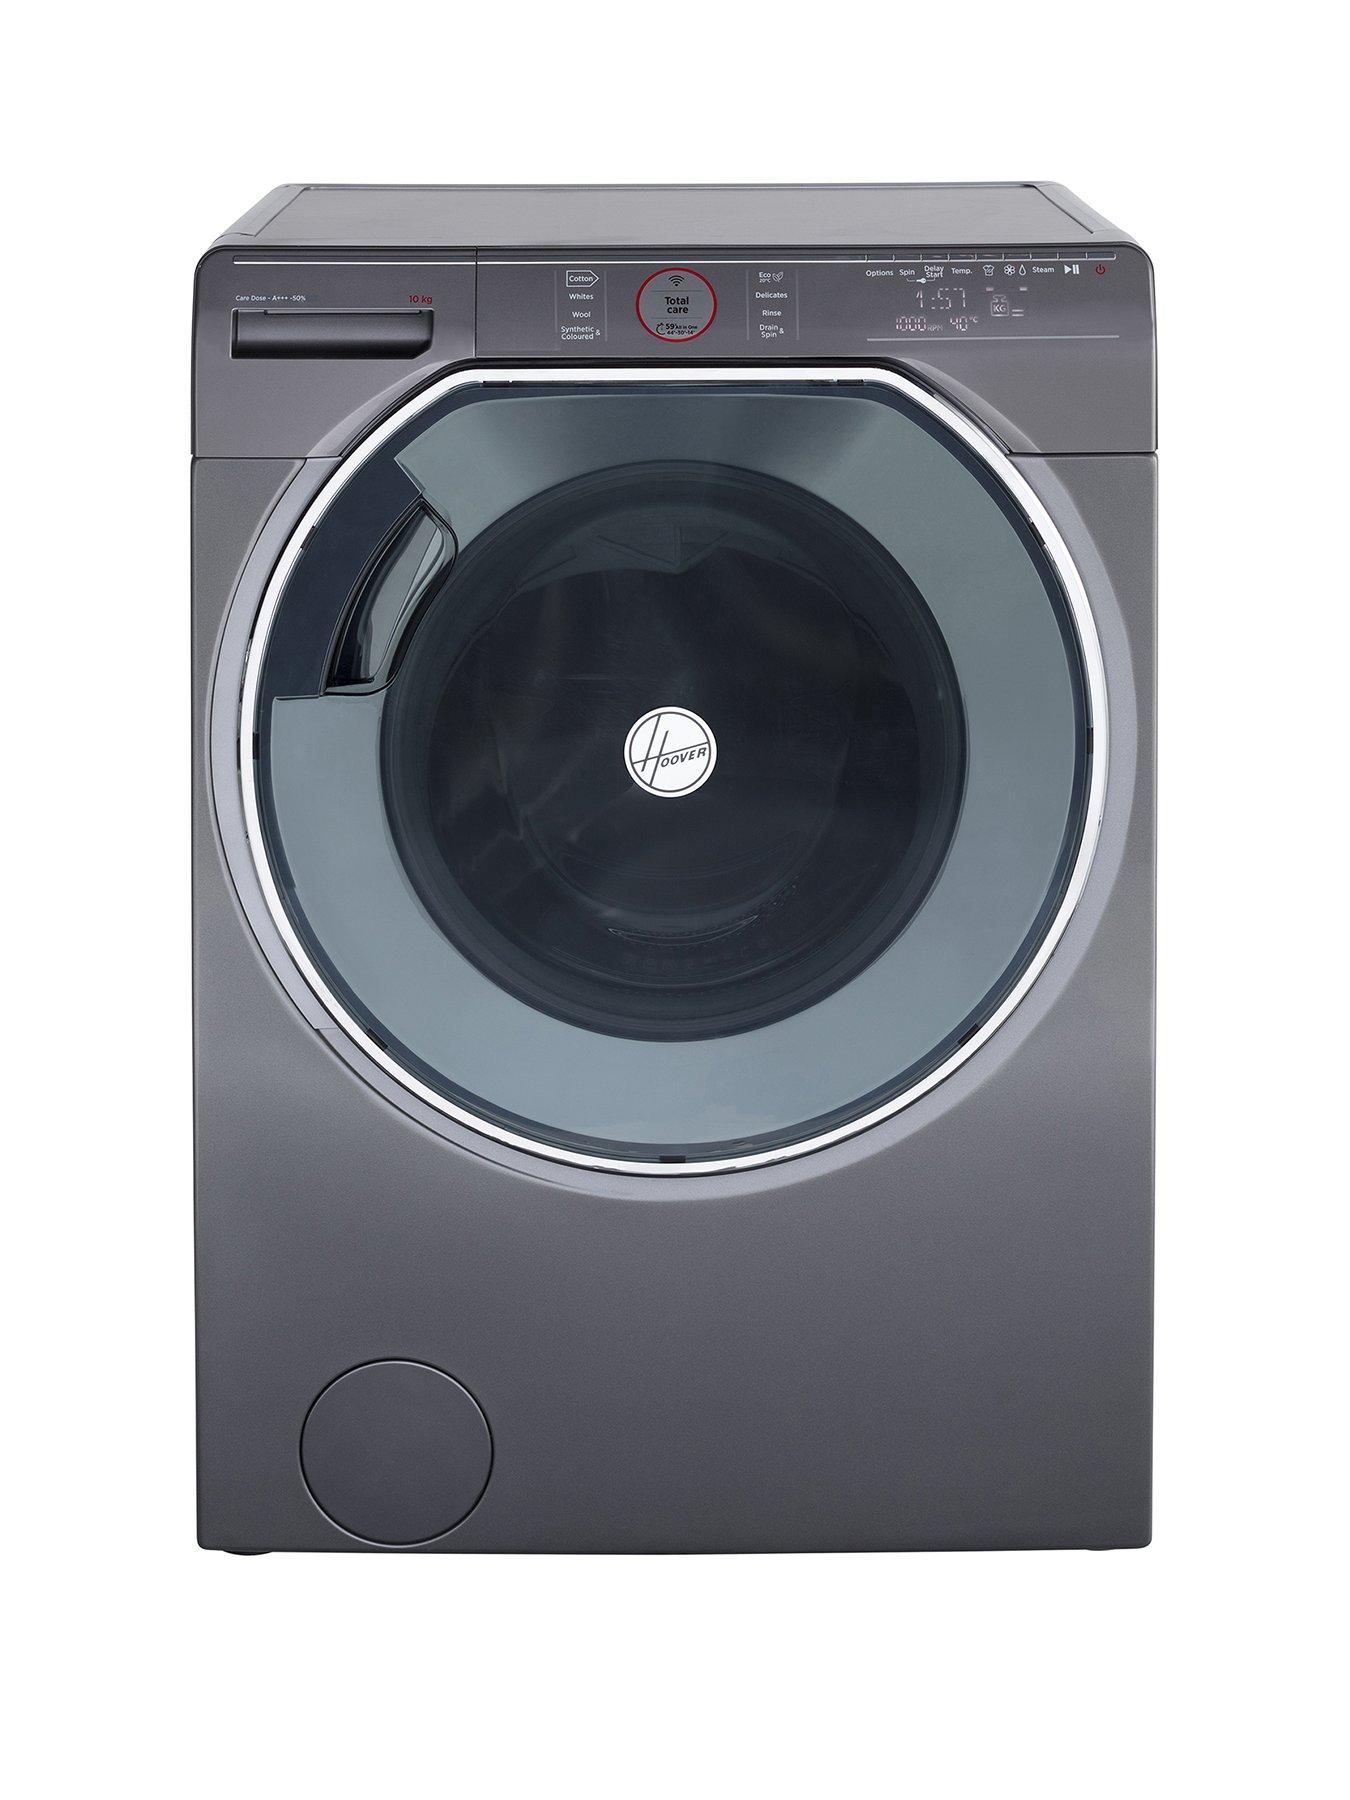 Hoover Axi Awmpd610Lh8R 10Kg Load, 1600 Spin Washing Machine With Ai Technology – Graphite/Black.